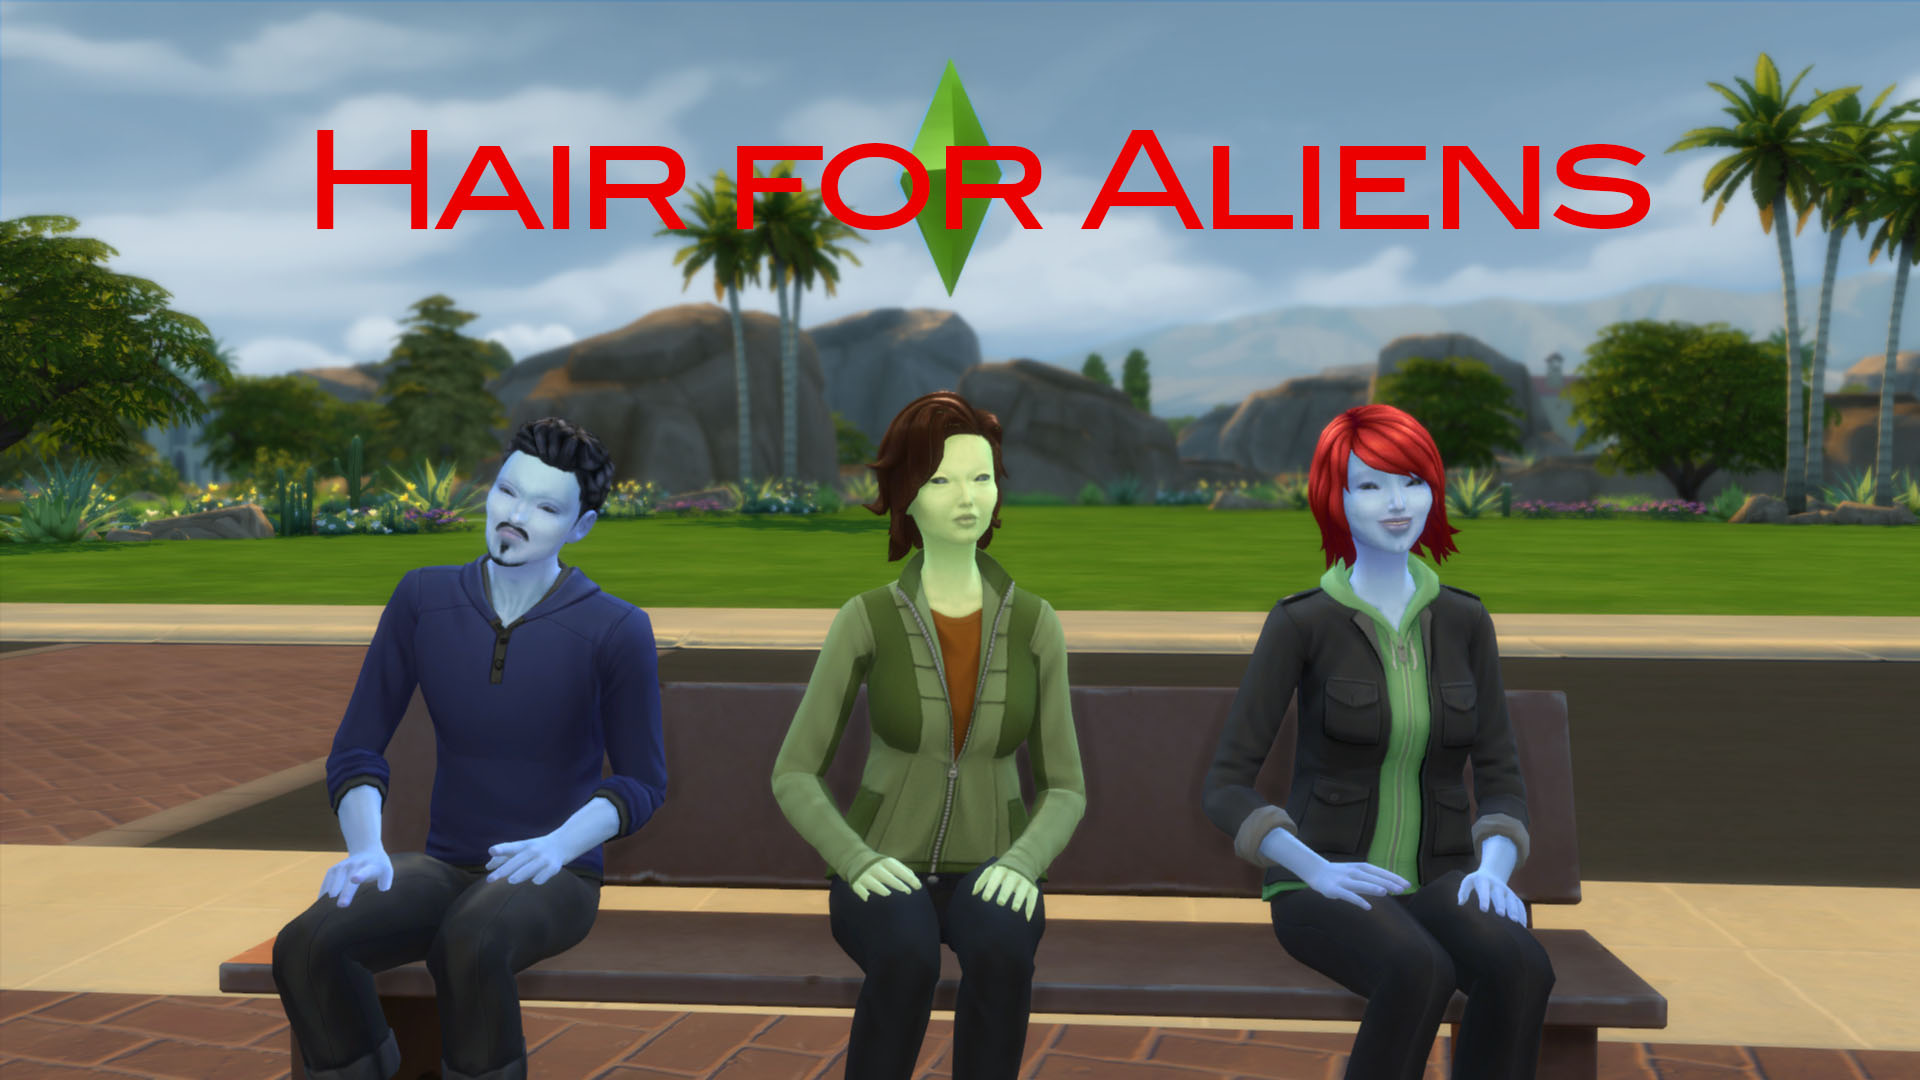 Mod The Sims Hair For Aliens